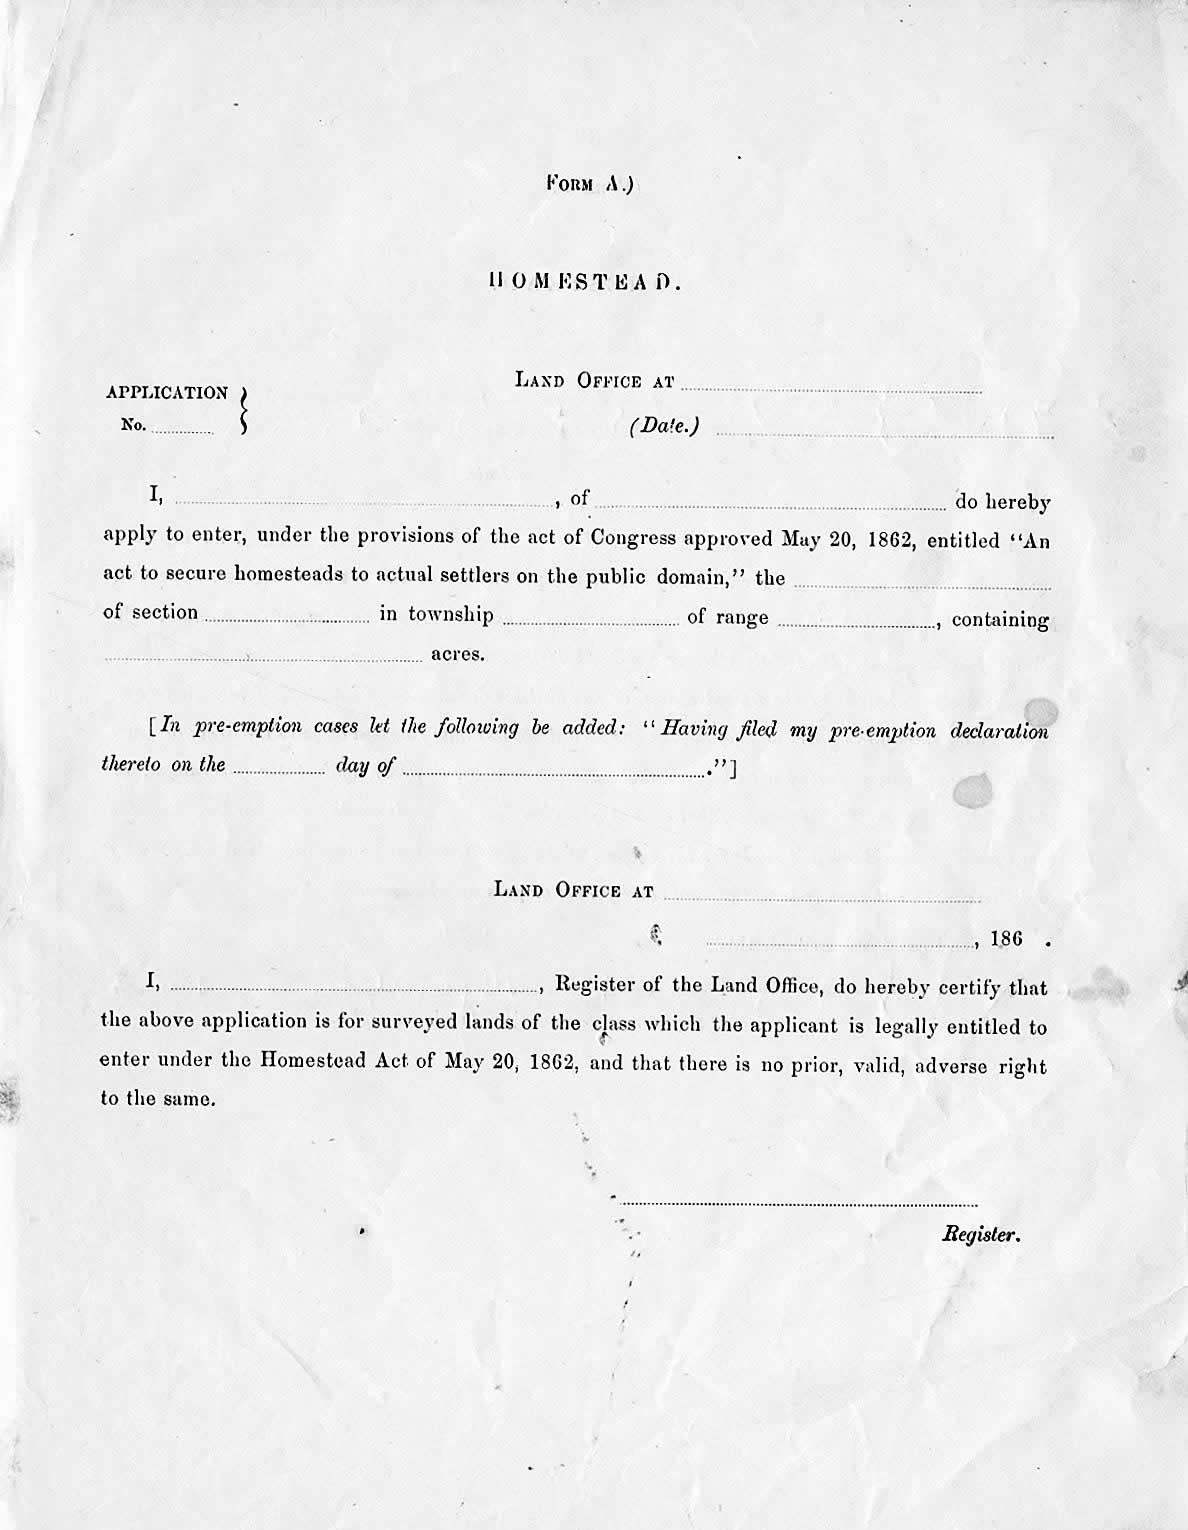 Blank application form that a homesteader and a Land Office Register had to fill out and sign to make a land claim, 1862.